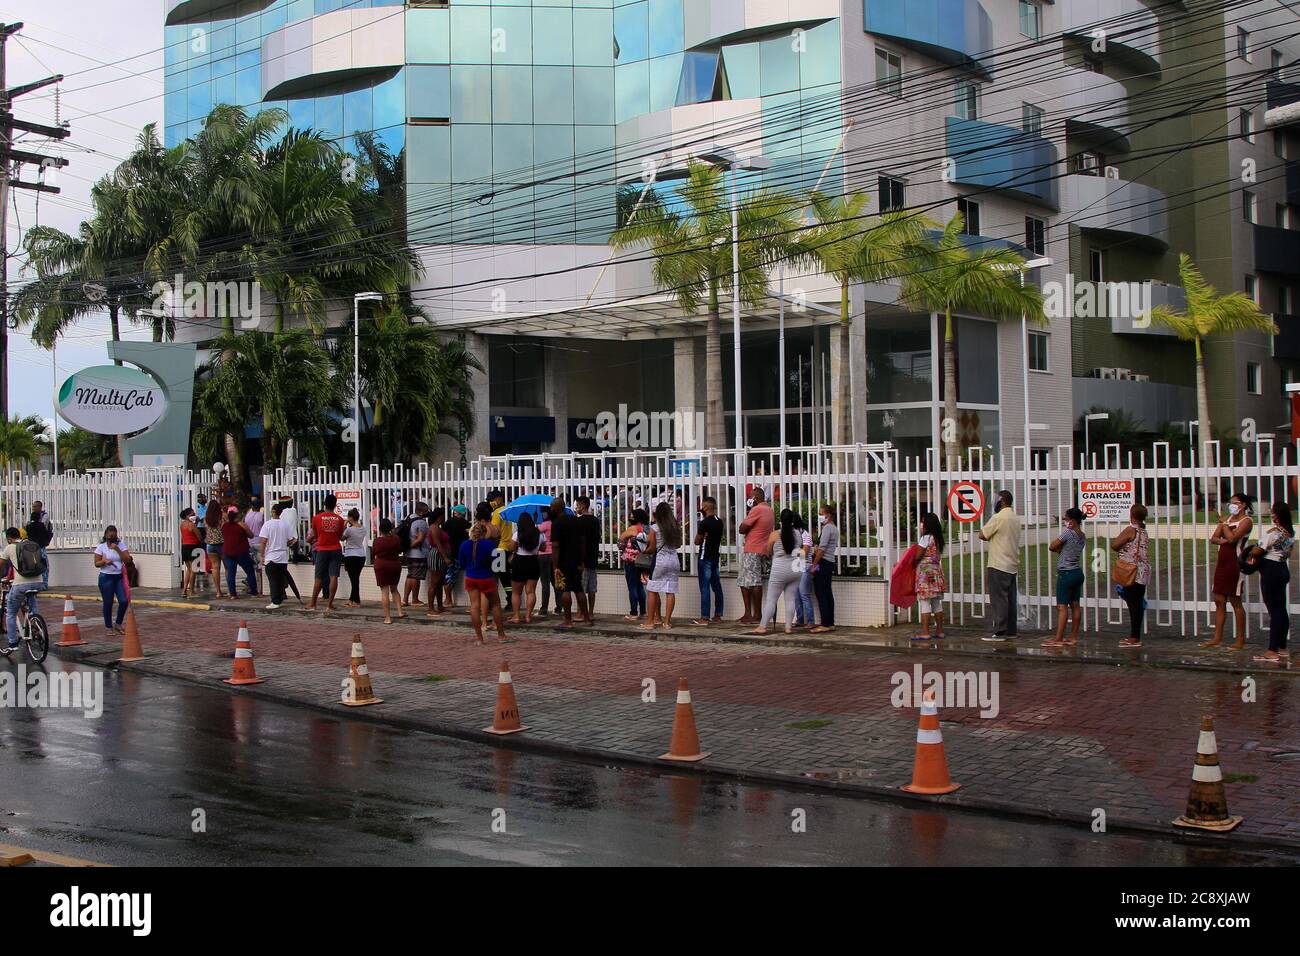 Salvador, Brazil. 27th July, 2020. Agglomeration and queue at the entrance of a bank branch of Caixa Econômica Federal, in the middle of the pandemic, in the neighborhood of Sussuarana, in Salvador, (BA). Credit: Mauro Akiin Nassor/FotoArena/Alamy Live News Stock Photo